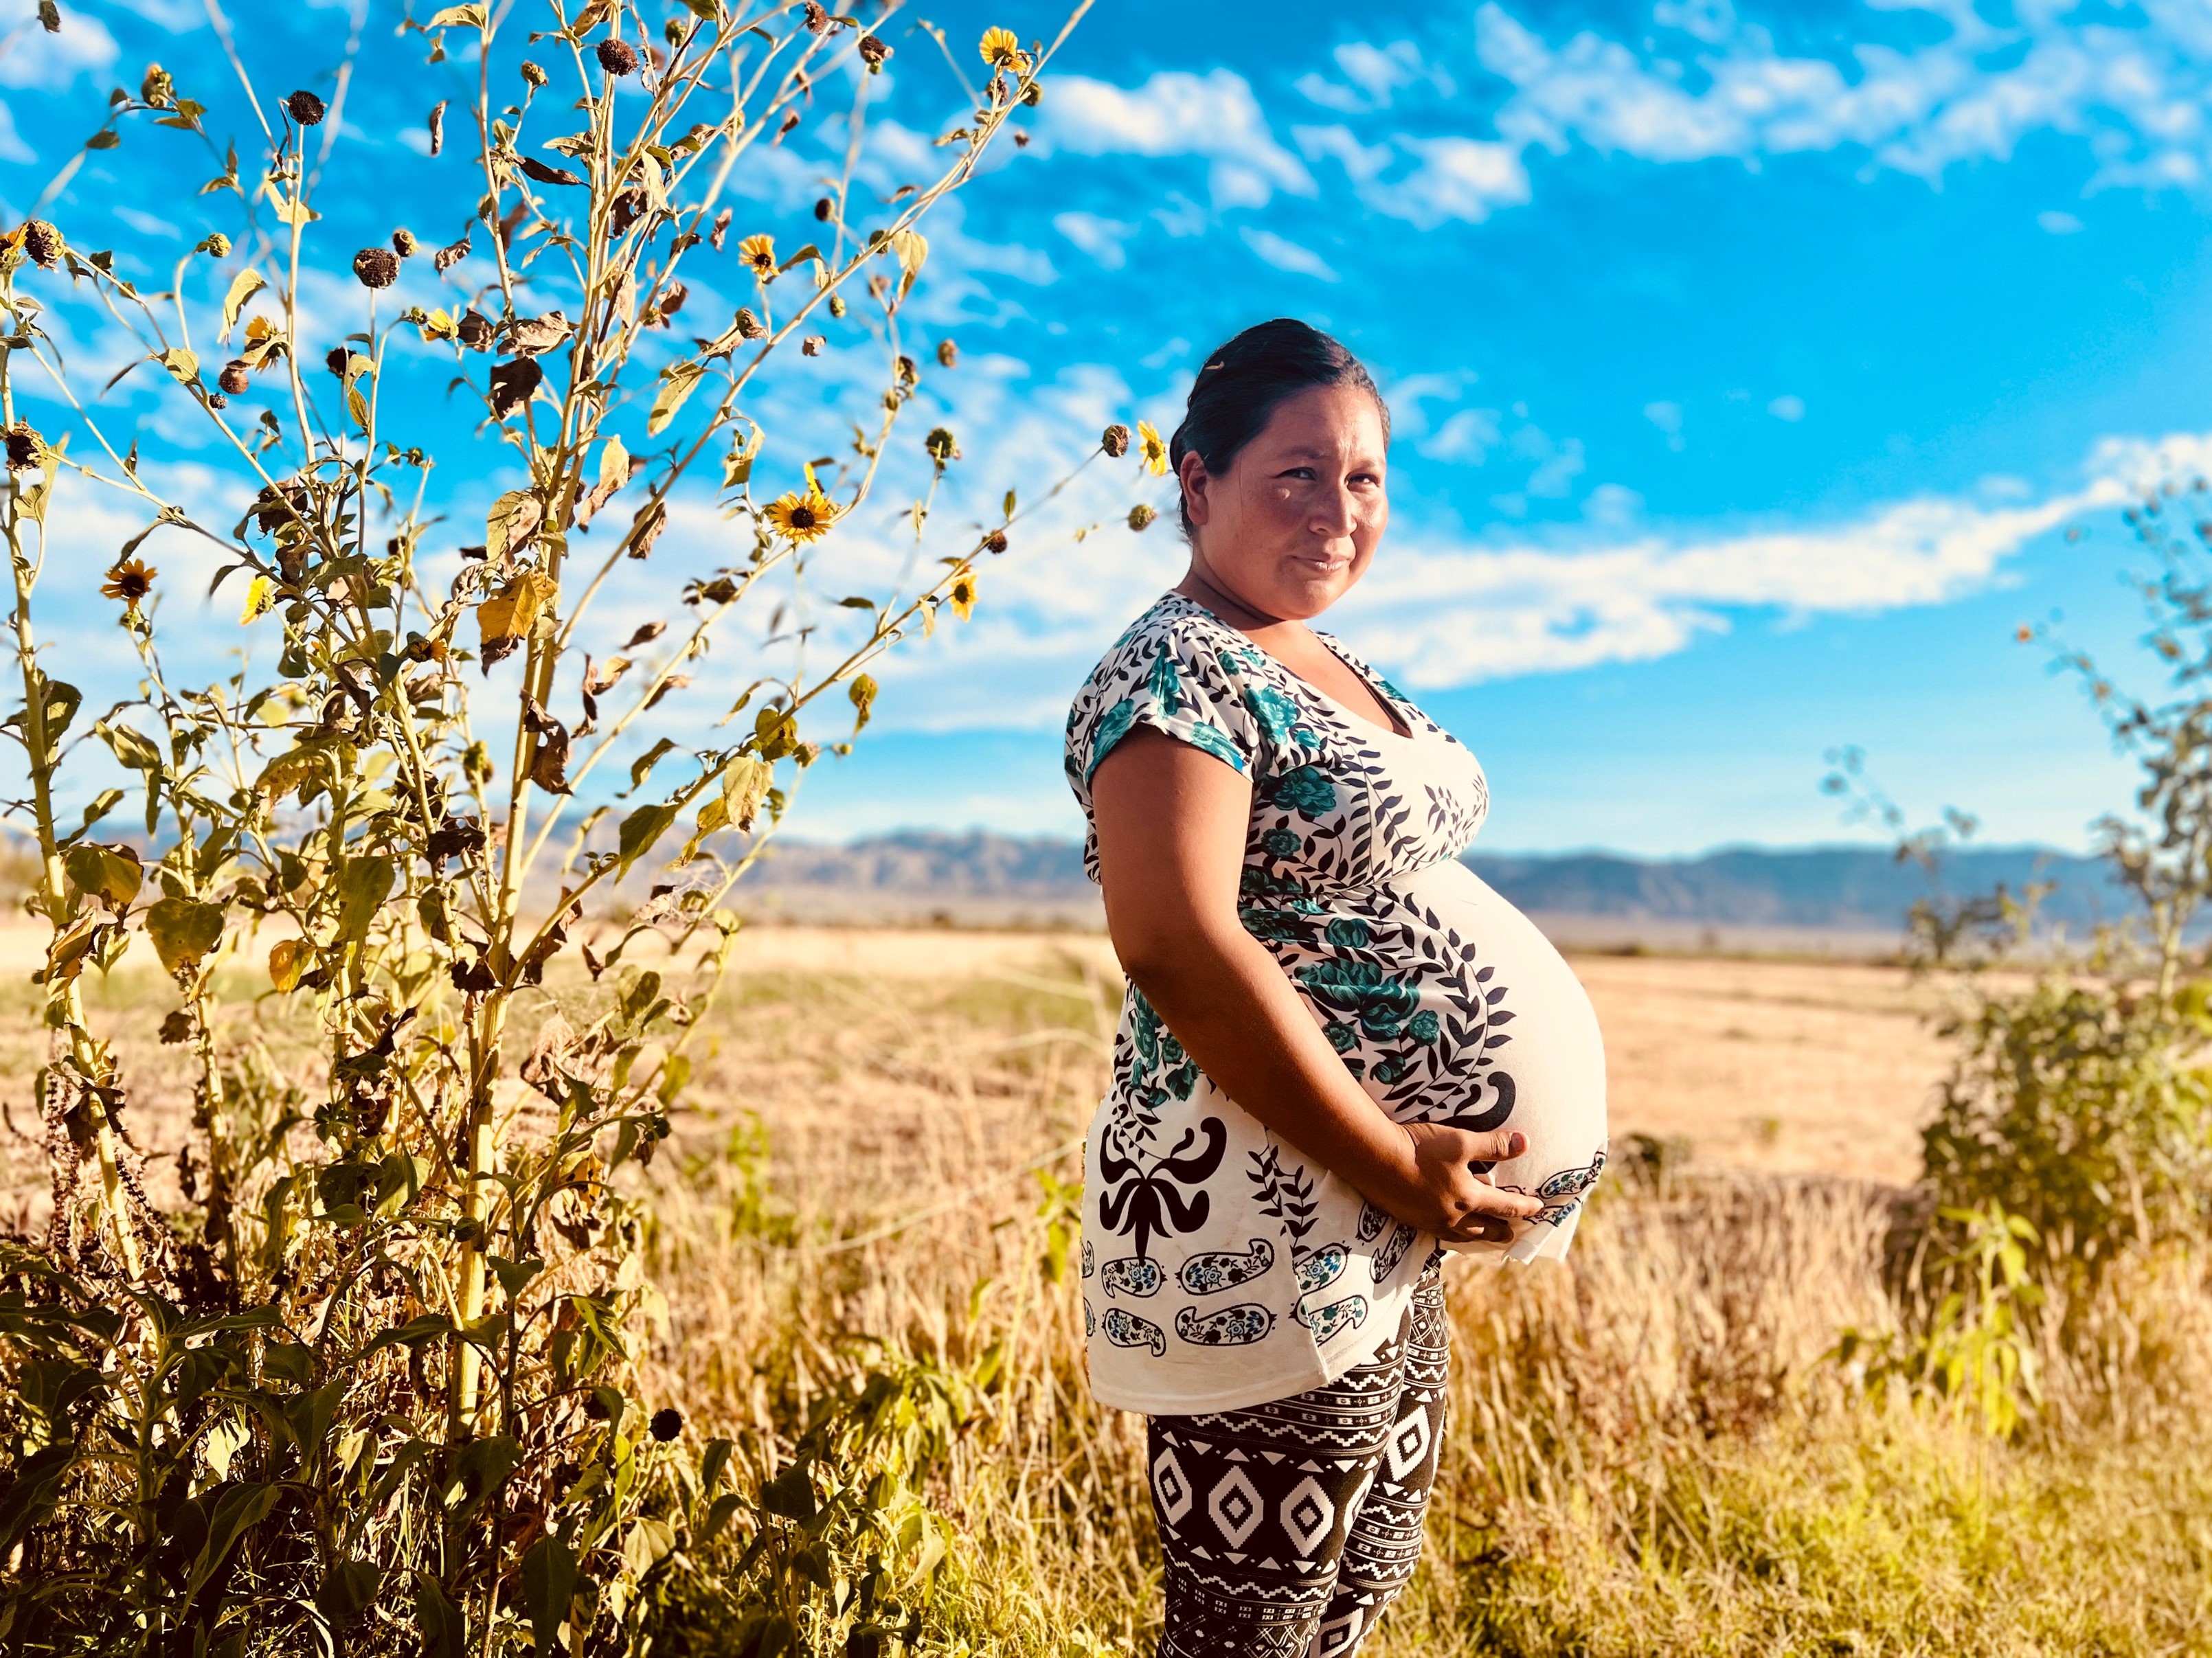 Pregnant woman in field of weeds and flowers